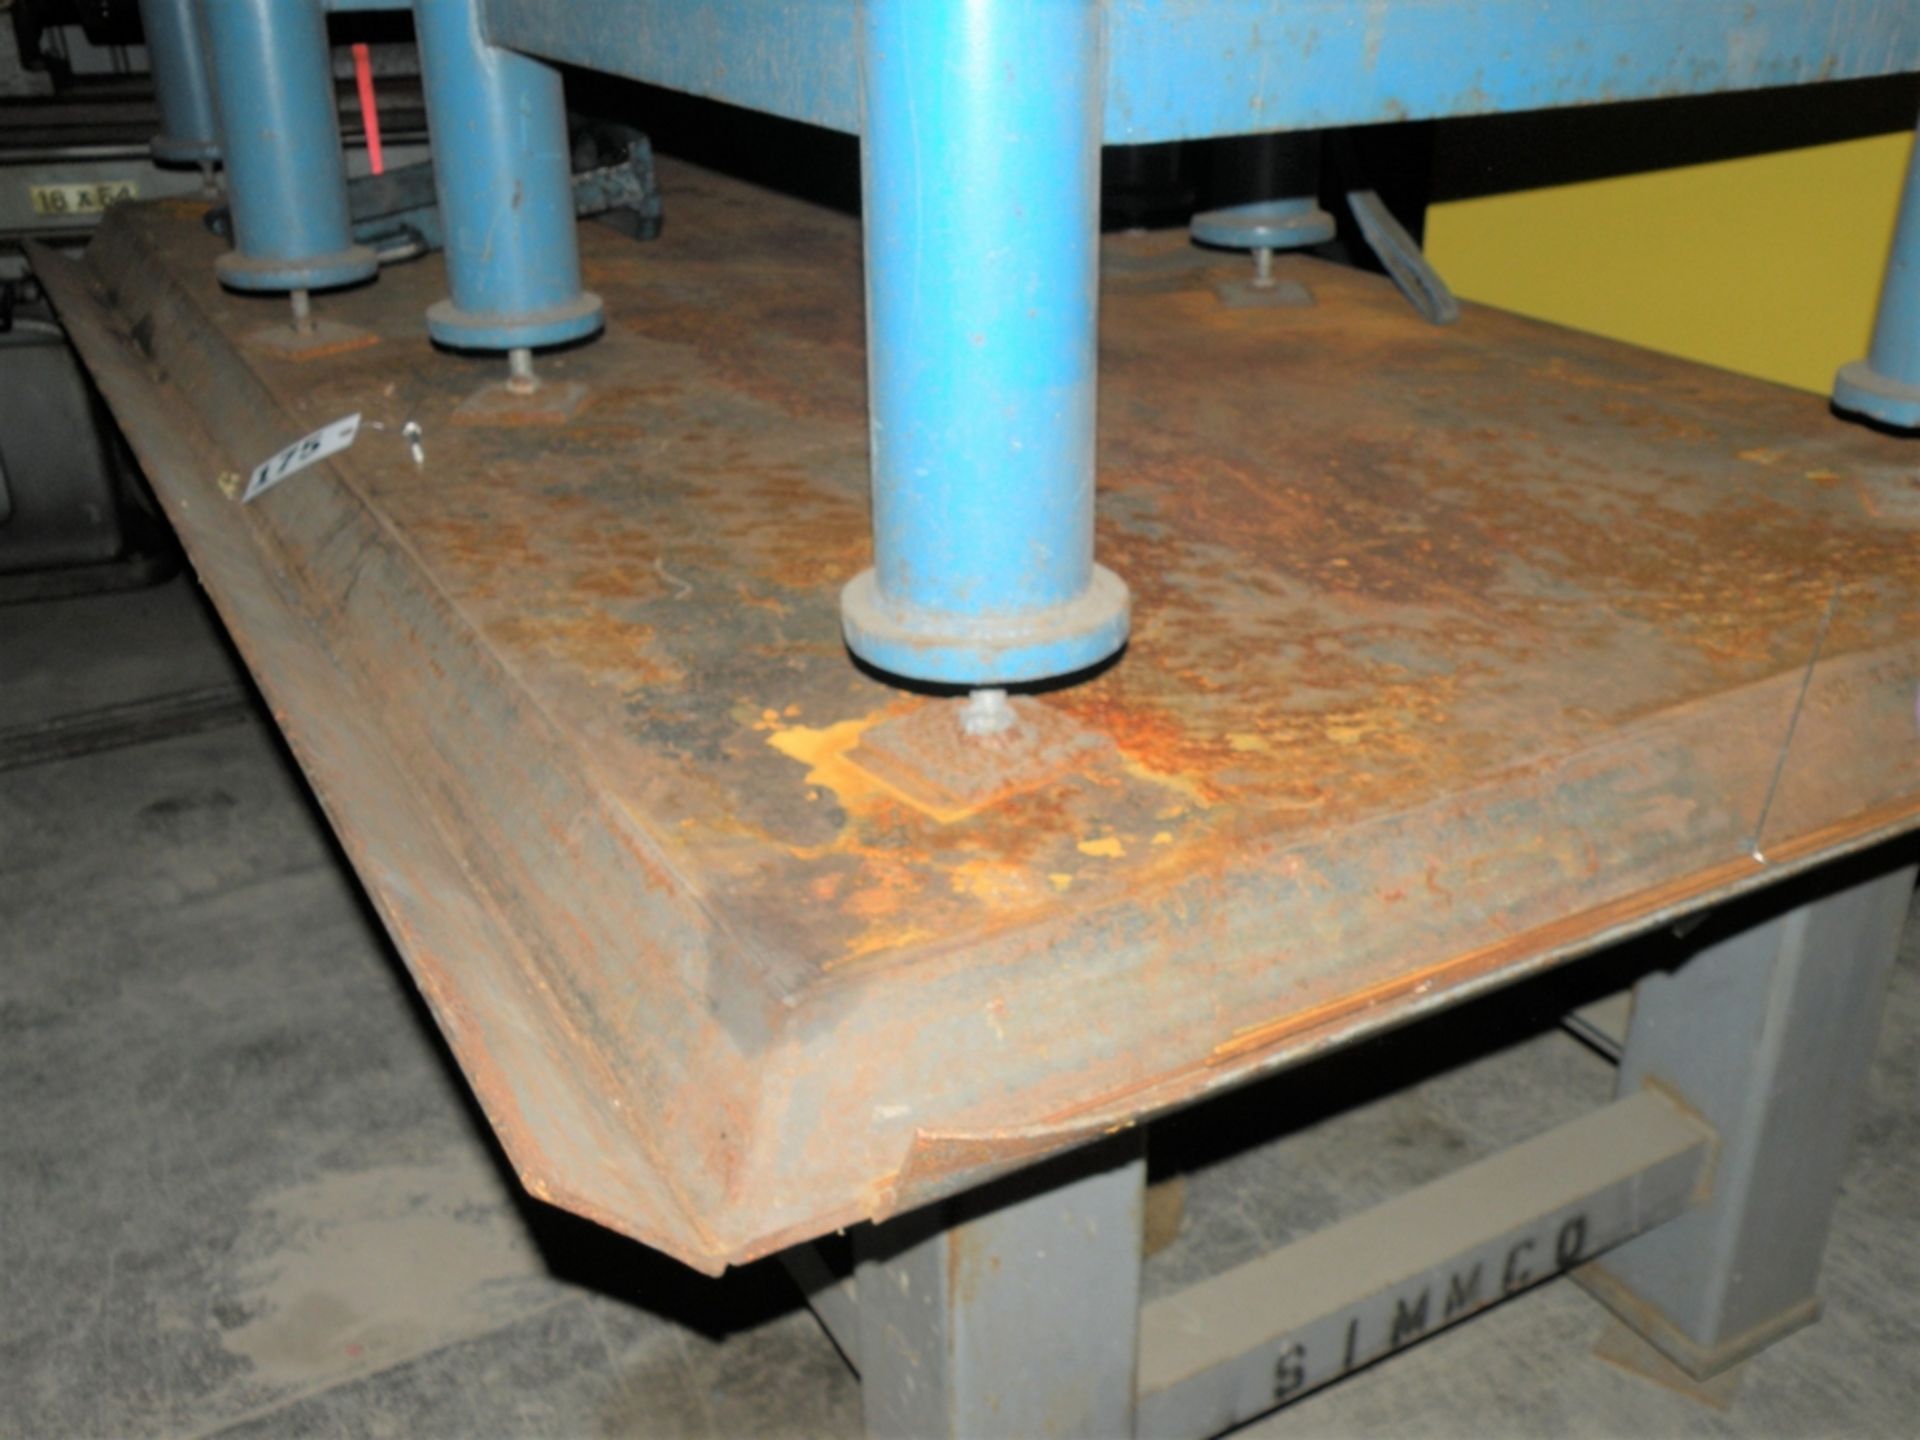 4' x 8' x 1" Thick Heavy Duty Steel Welding Table w/ 4" Angle Trough - Image 3 of 3